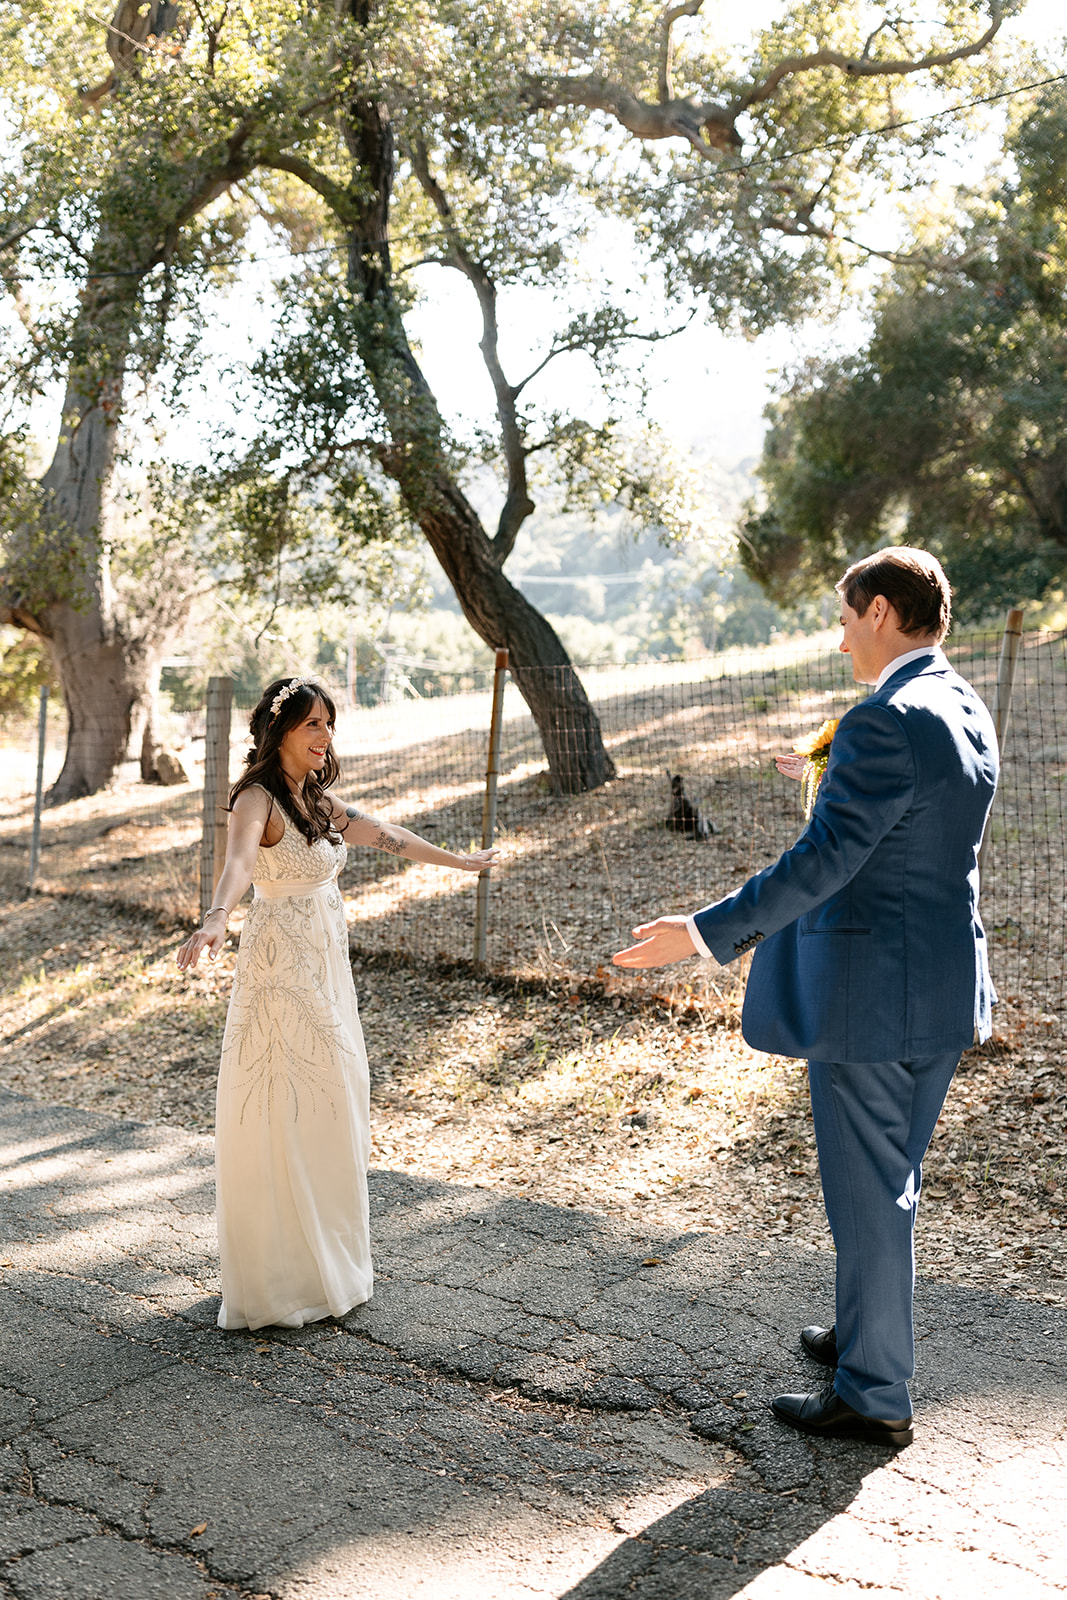 inn of the seventh ray wedding topanga california socal bride and groom pictures photos wedding photographer elopement